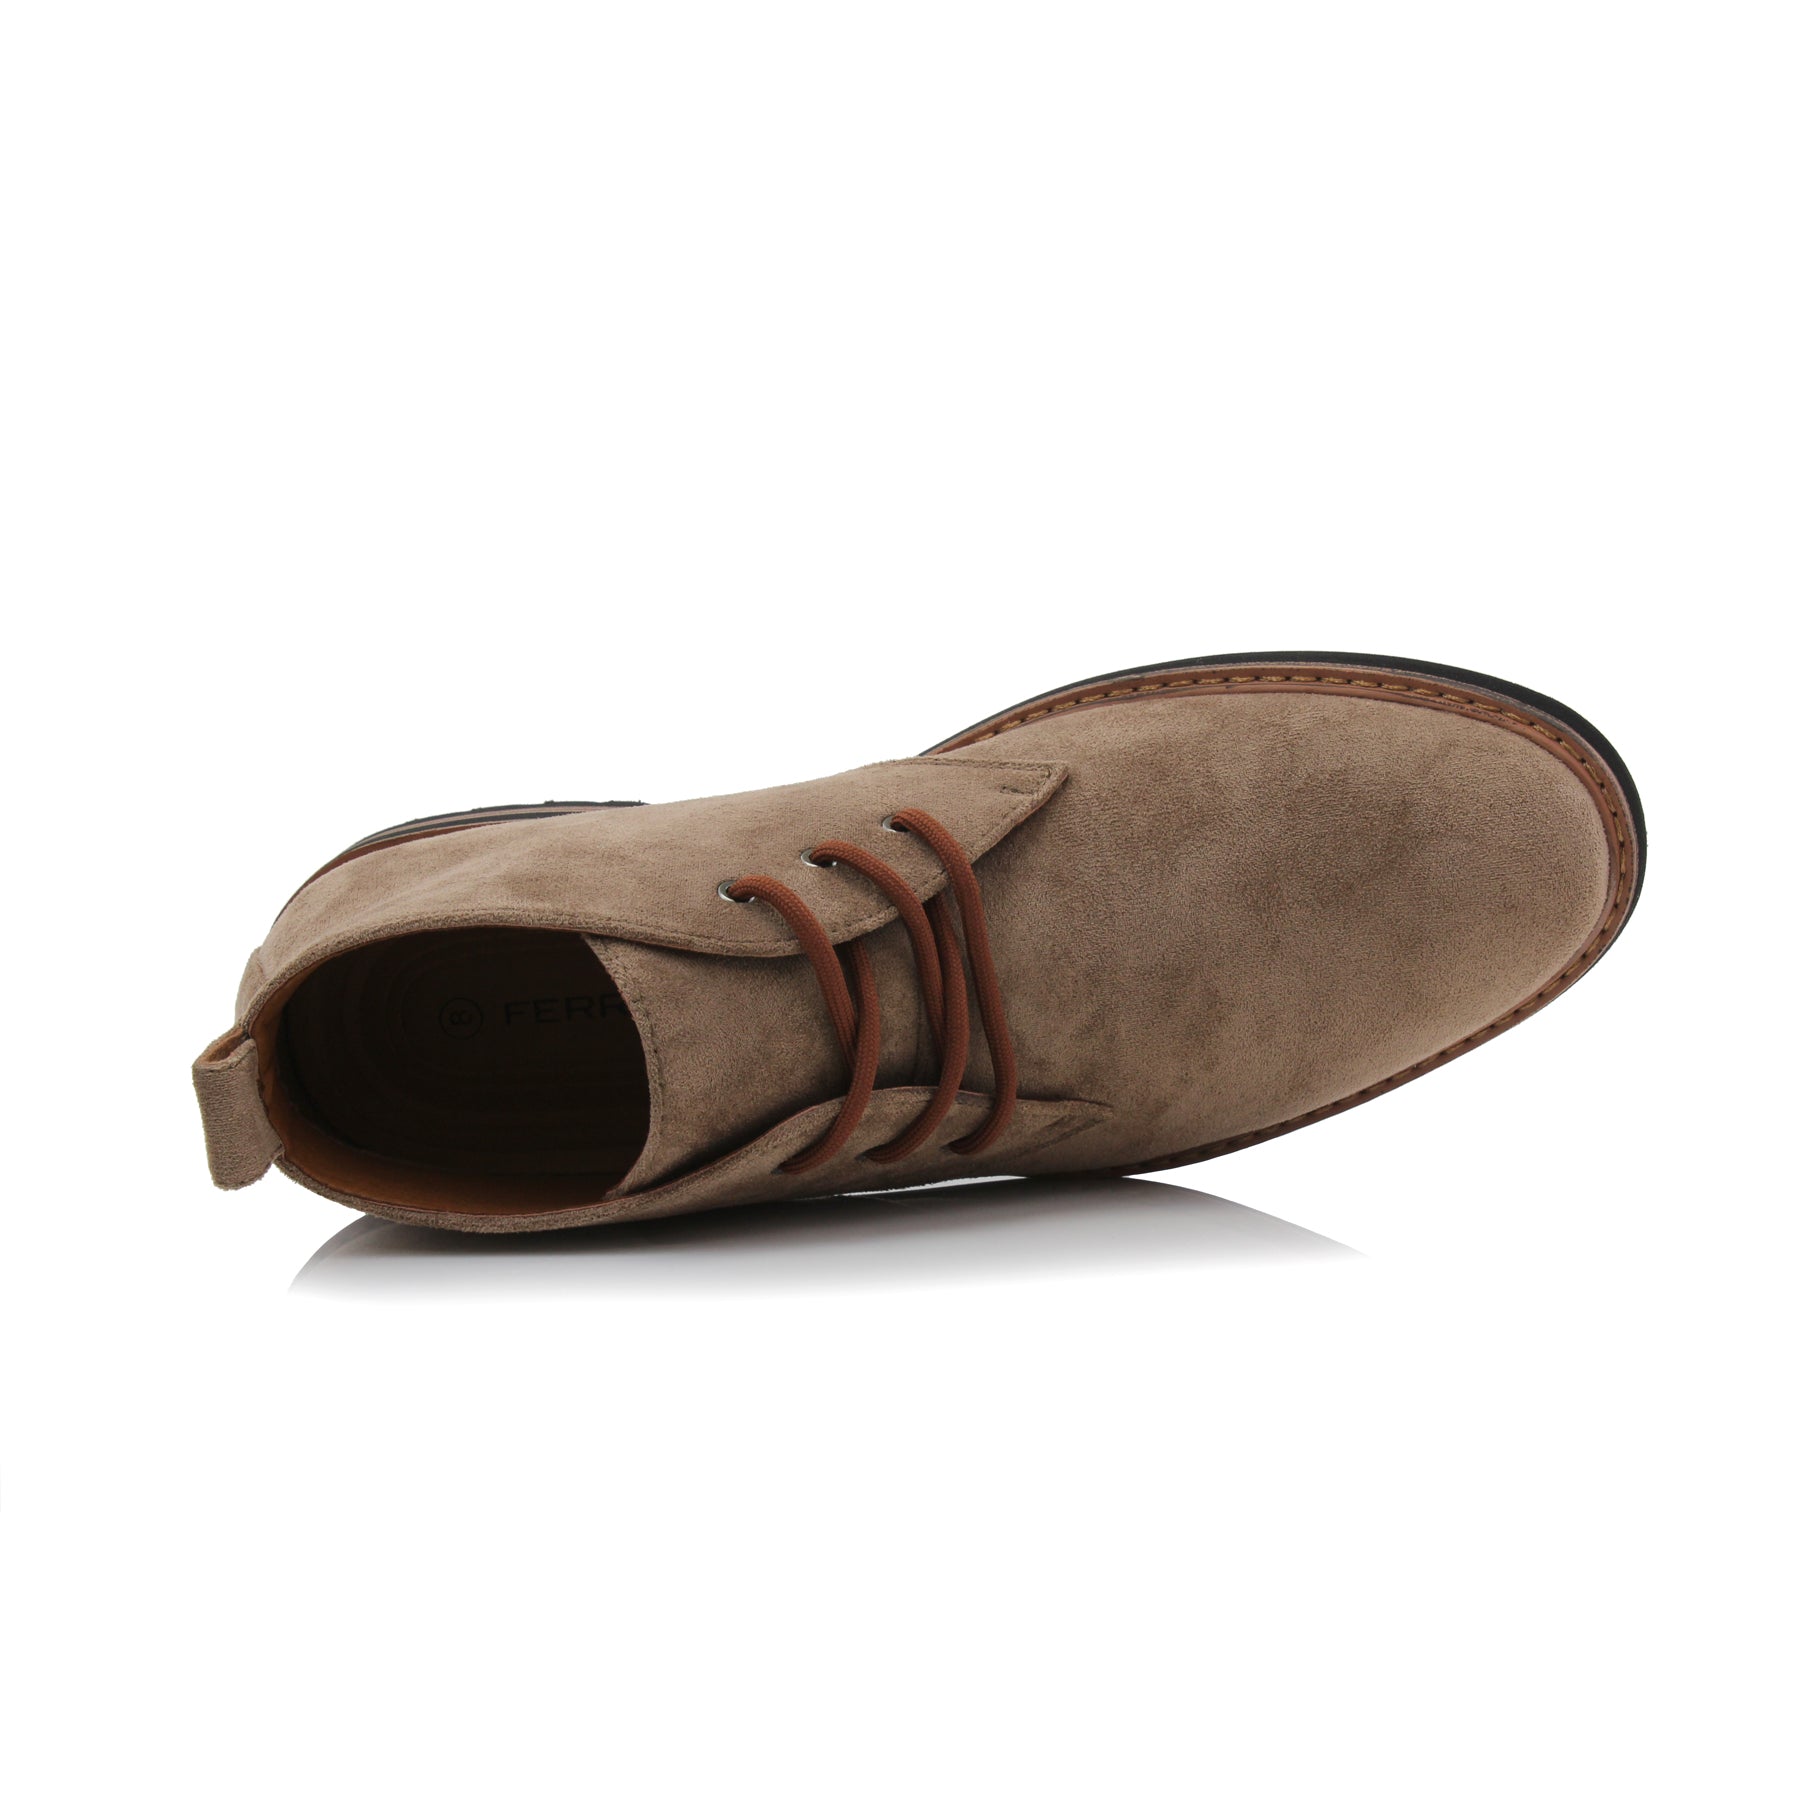 Suede Chukka Boots | Pablo by Ferro Aldo | Conal Footwear | Top-Down Angle View